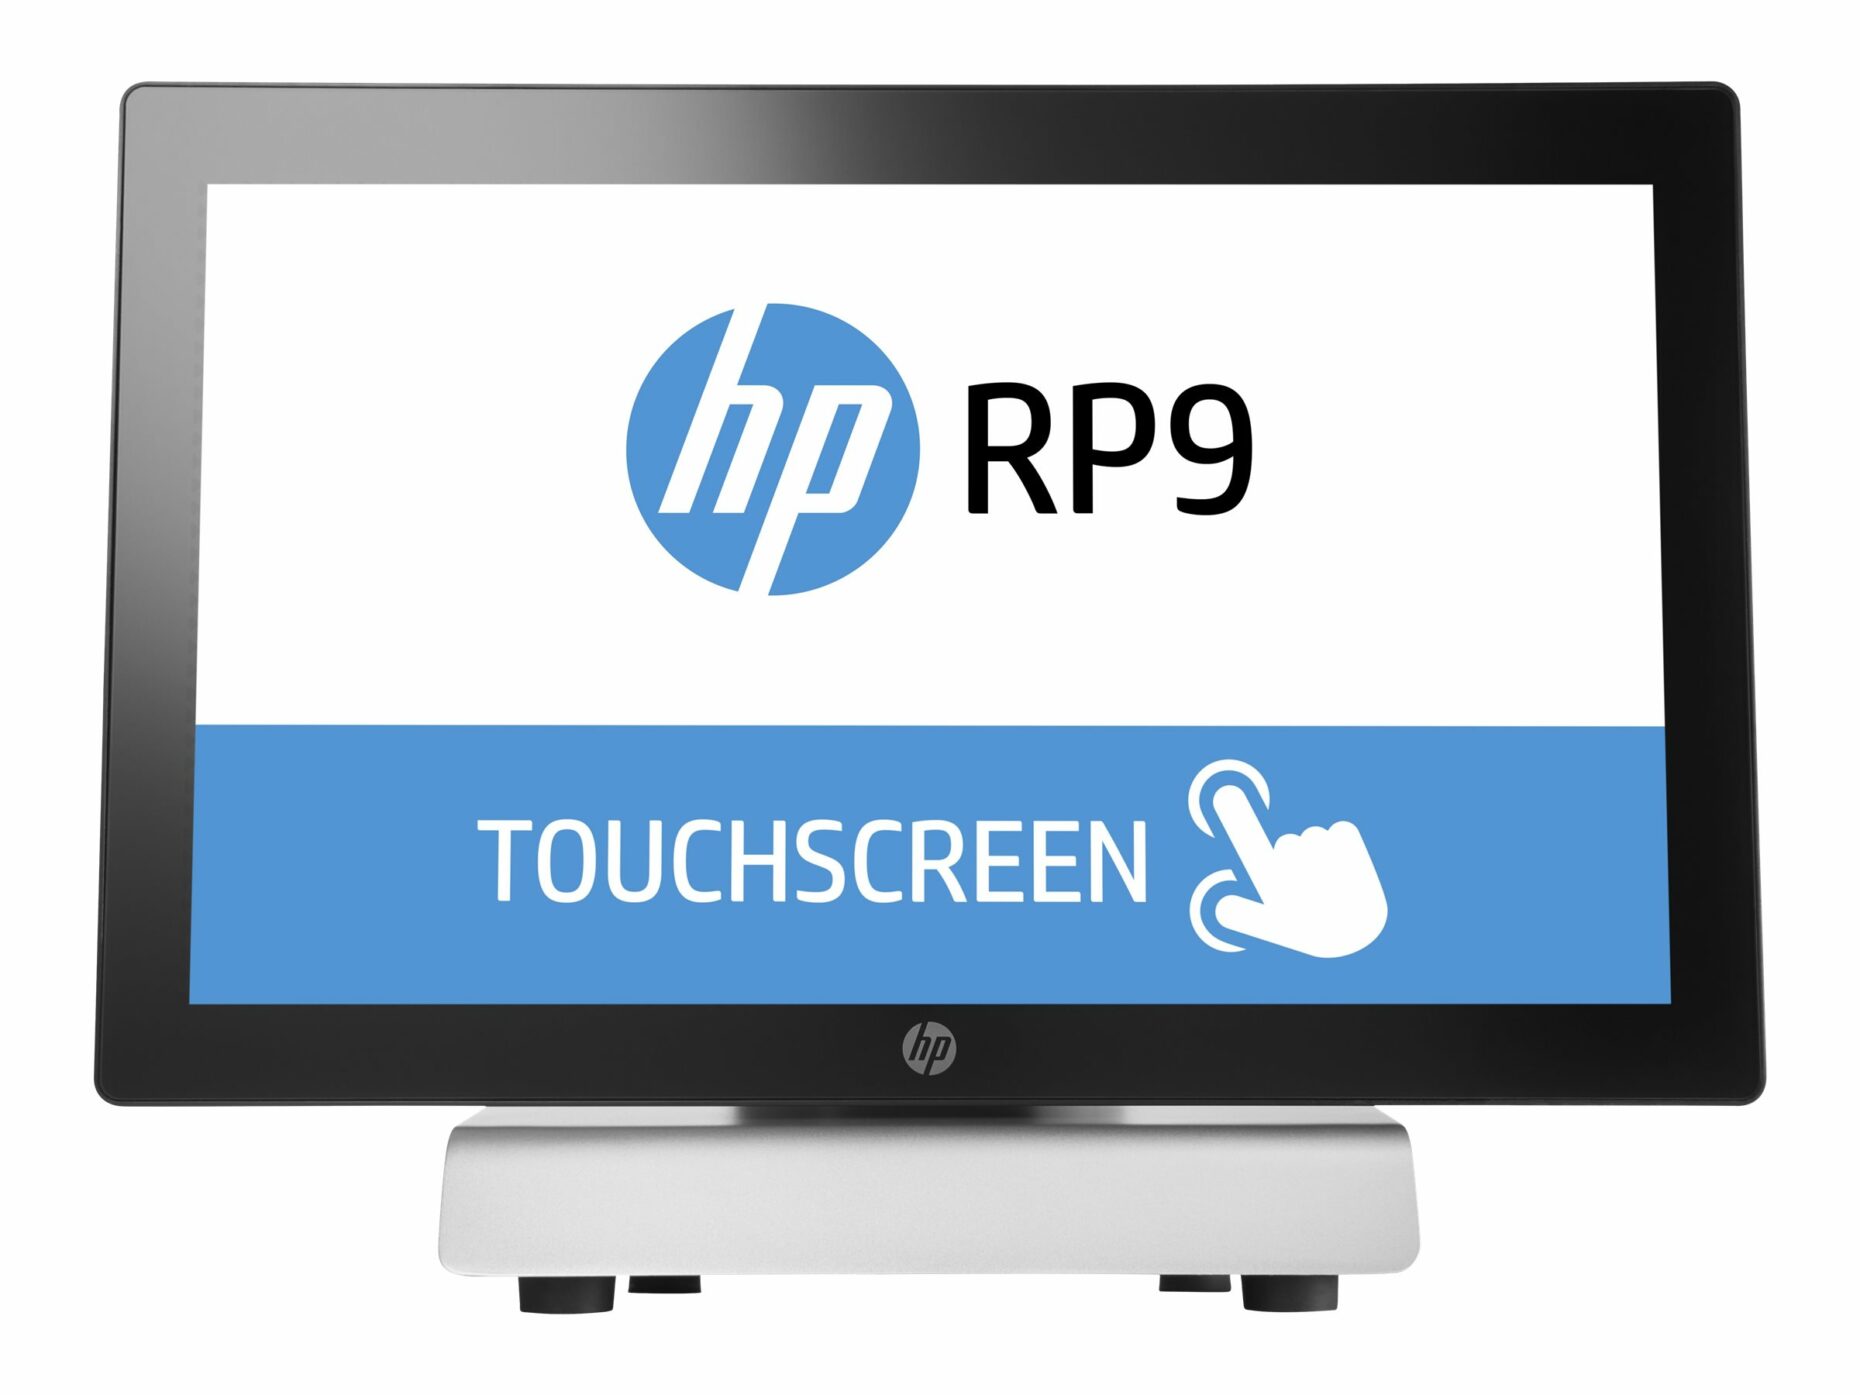 HP RP9 G1 Retail System 9018 - All-in-one - Core i3 6100 / 3.7 GHz - RAM 4 GB - HDD 500 GB - LED 18.5" (HD) touchscreen - Smart Buy - Desktop